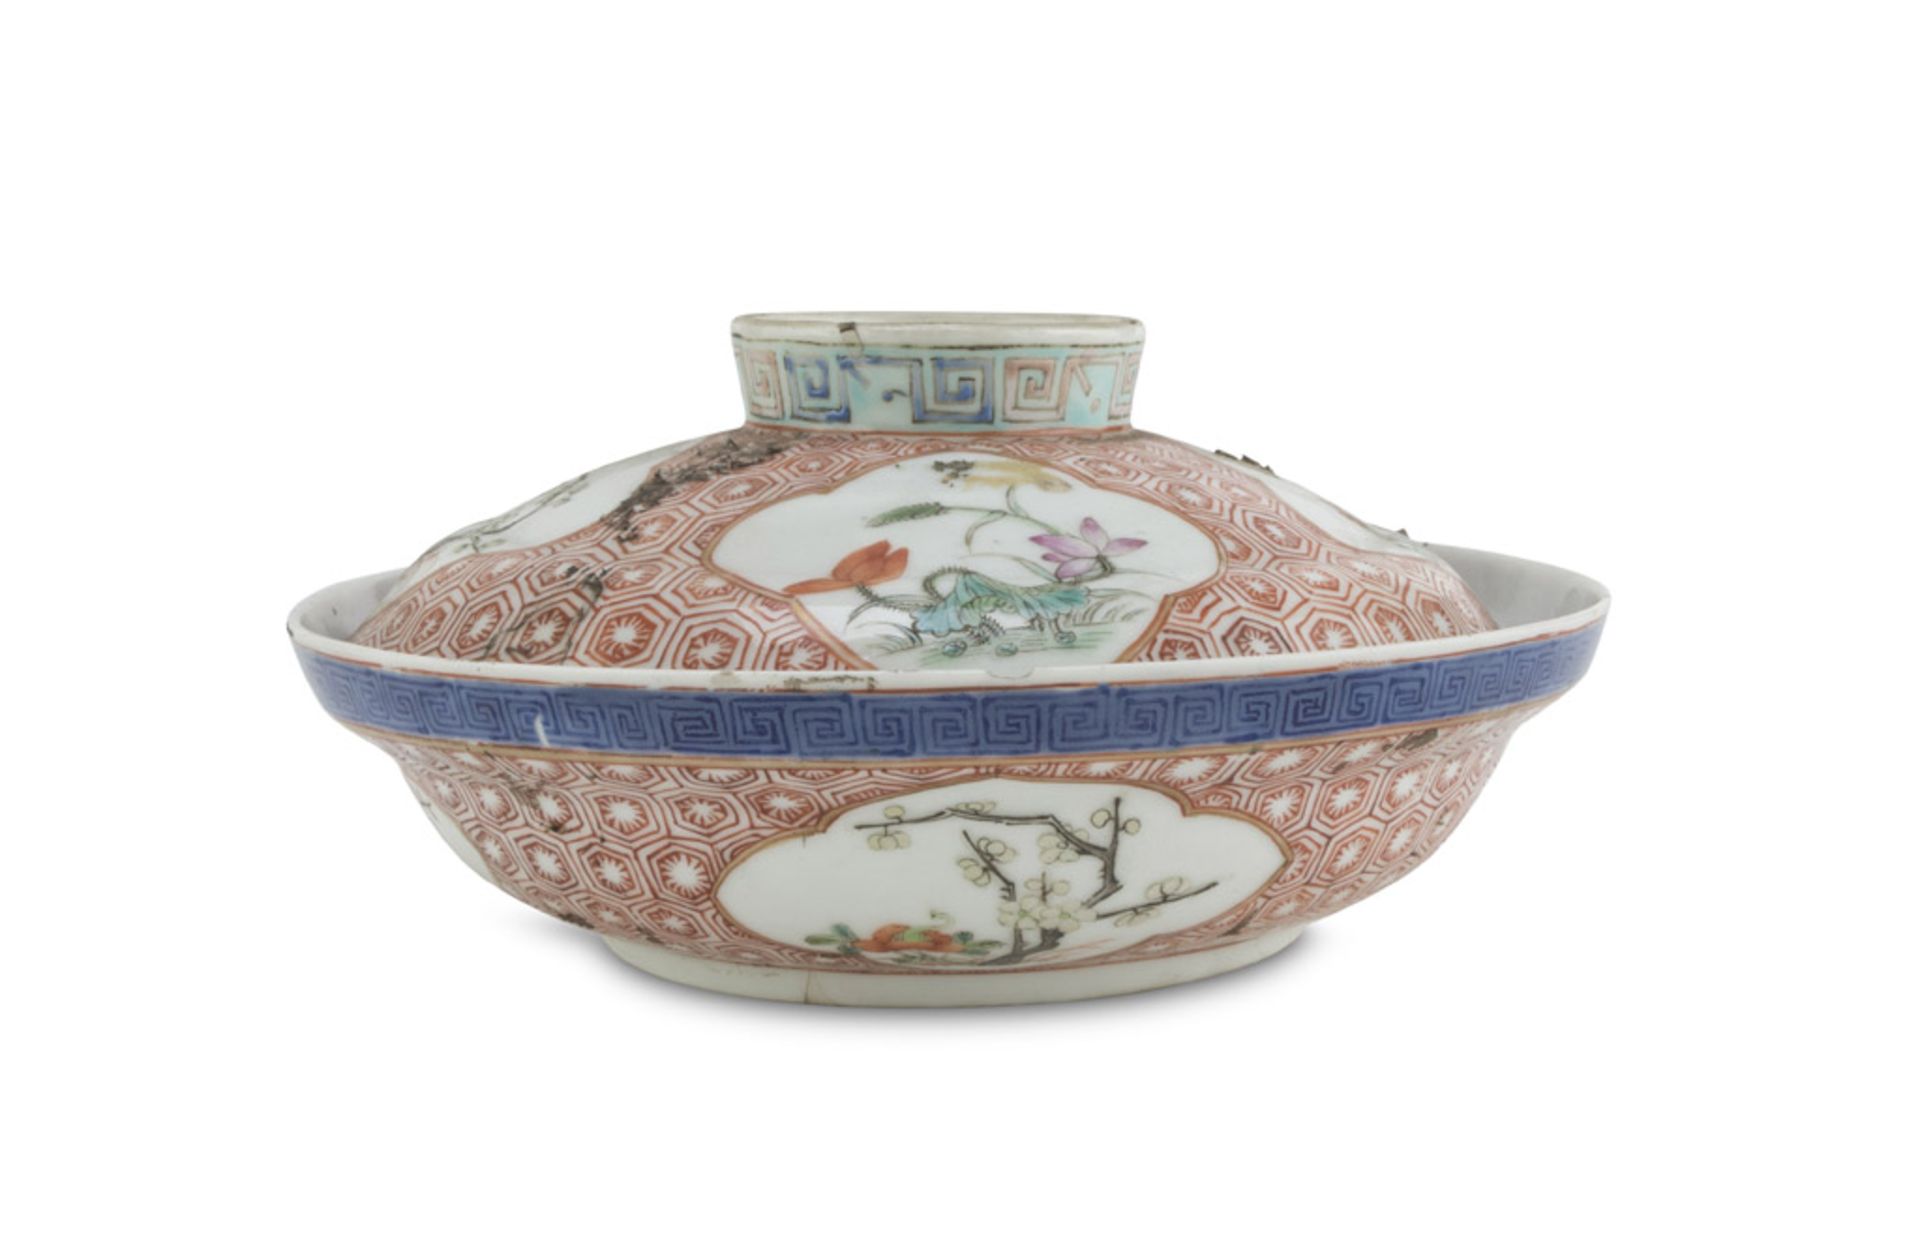 POLYCHROME ENAMELLED PORCELAIN SERVING BOWL WITH LID, CHINA FIRST HALF OF 20TH CENTURY decorated